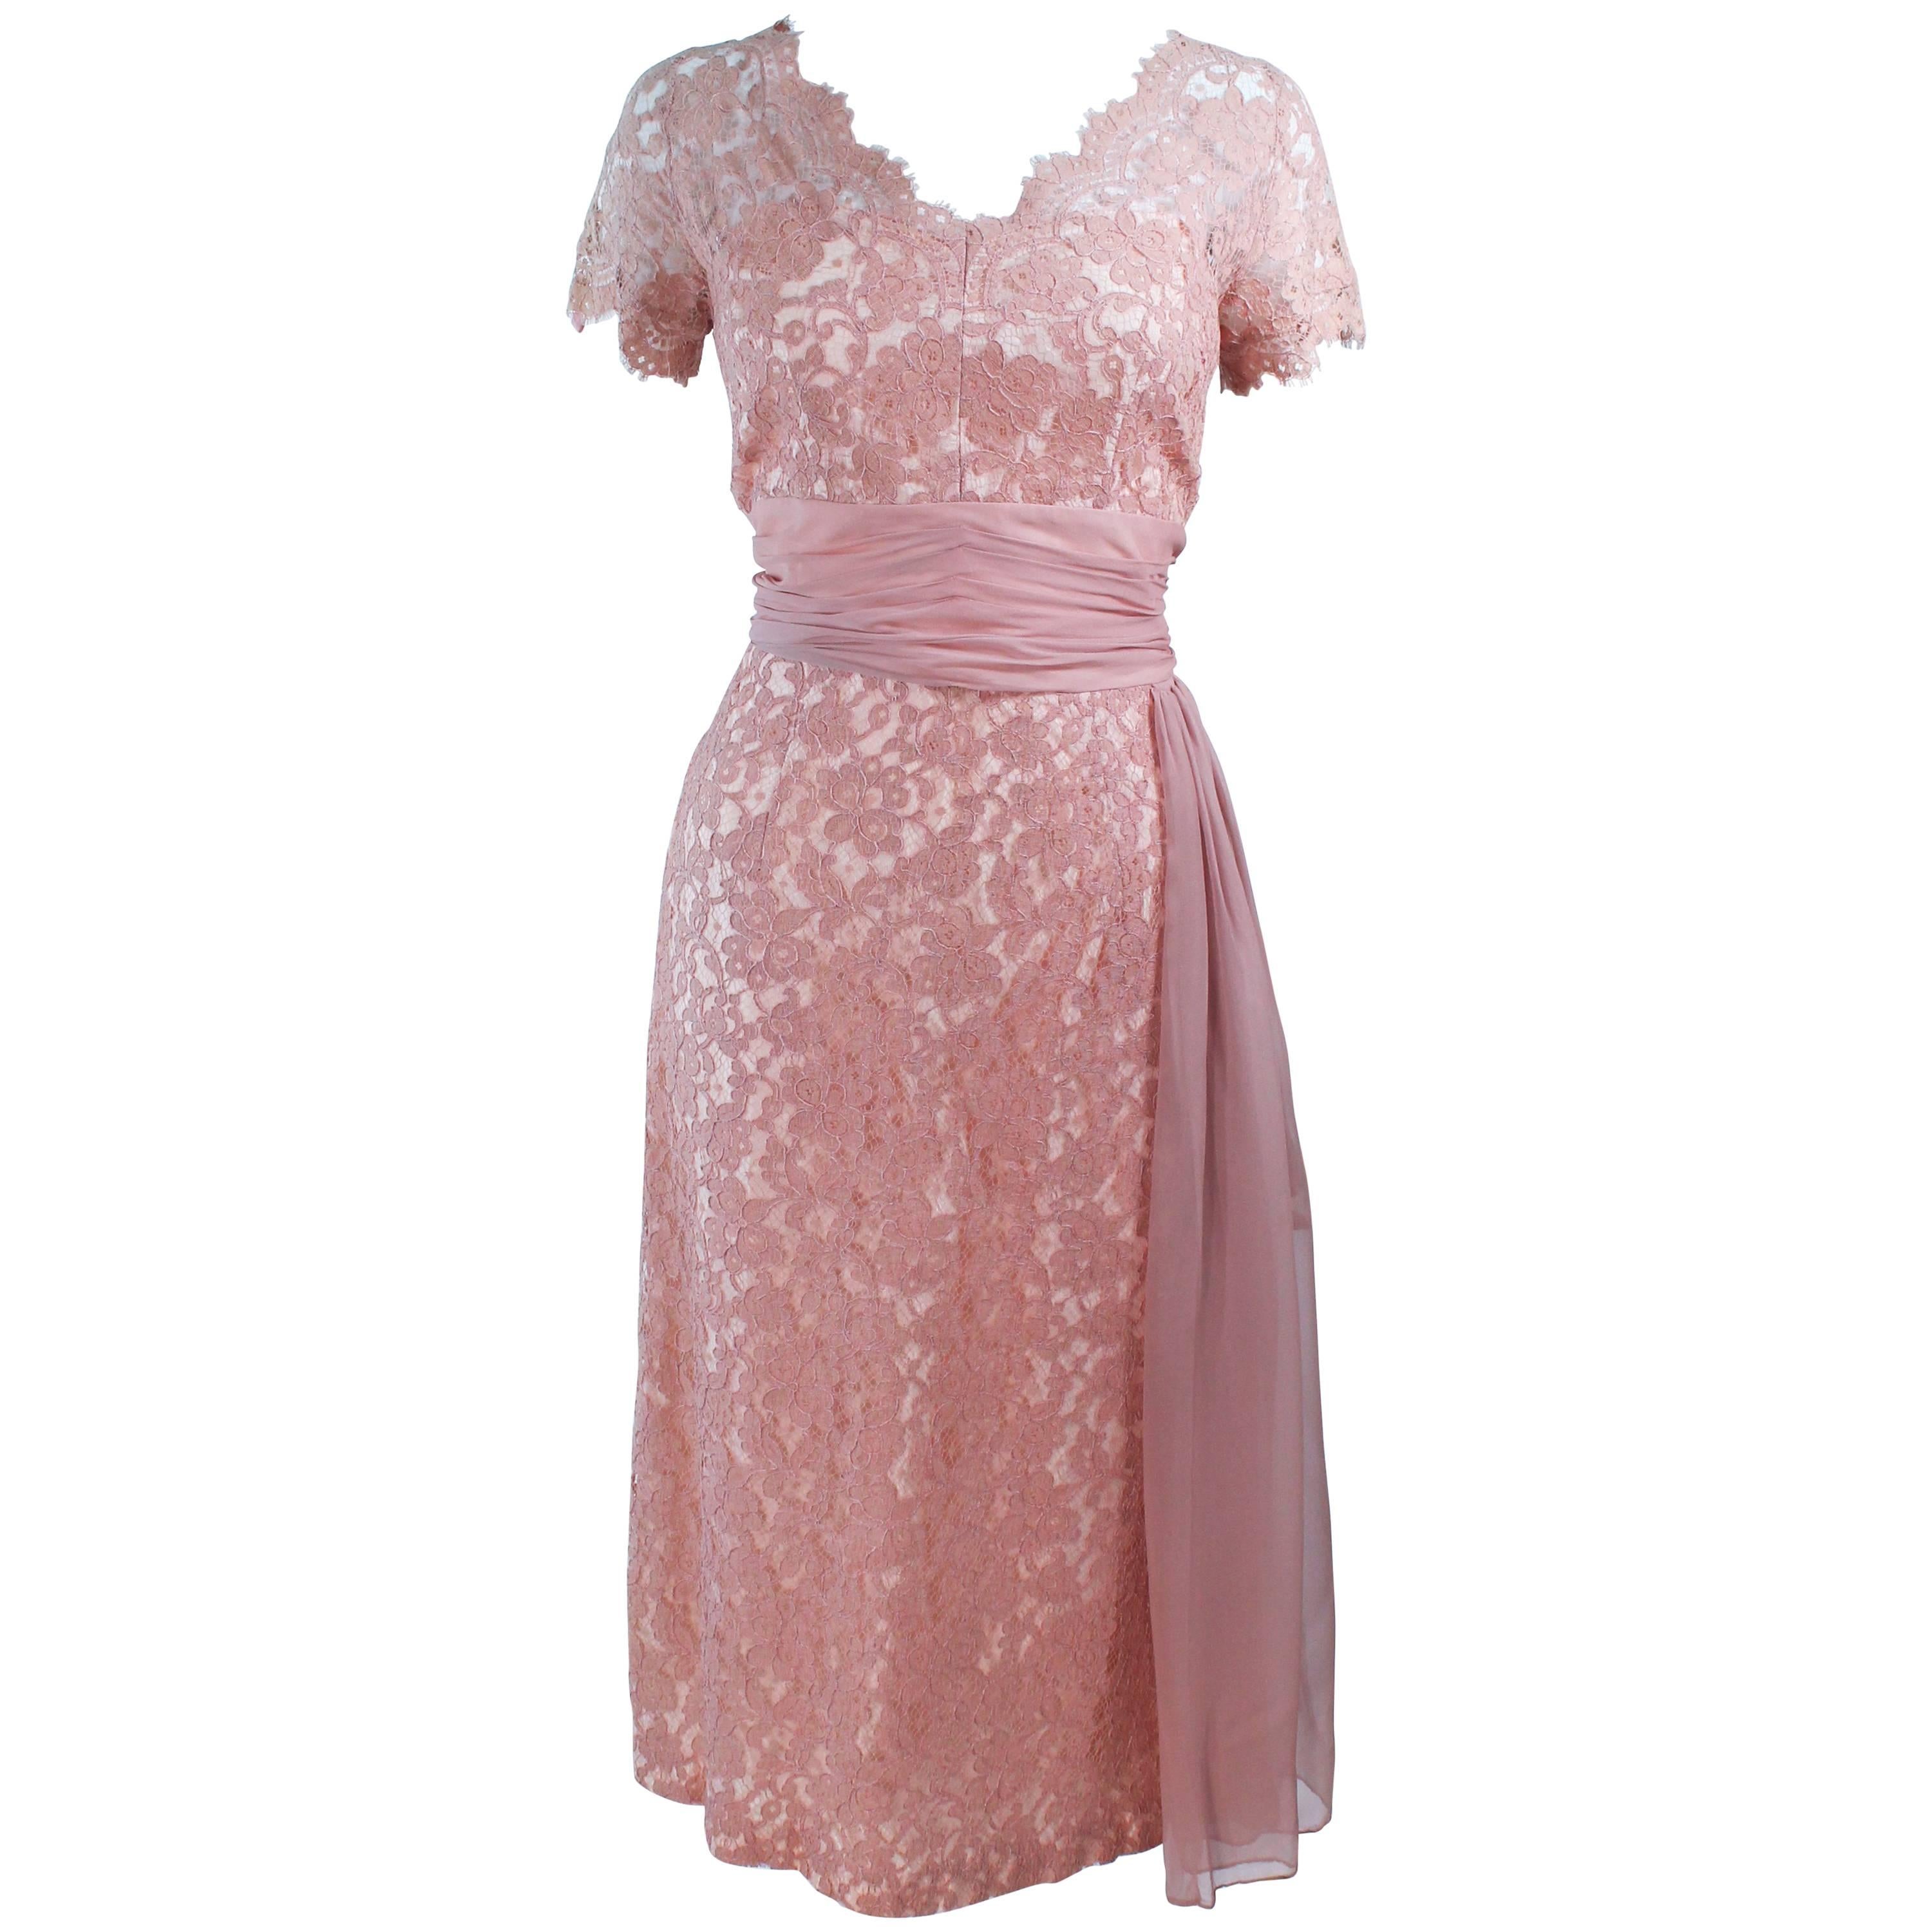 1950's Peach Lace Cocktail Dress with Draped Chiffon Waist Size 8 10 For Sale